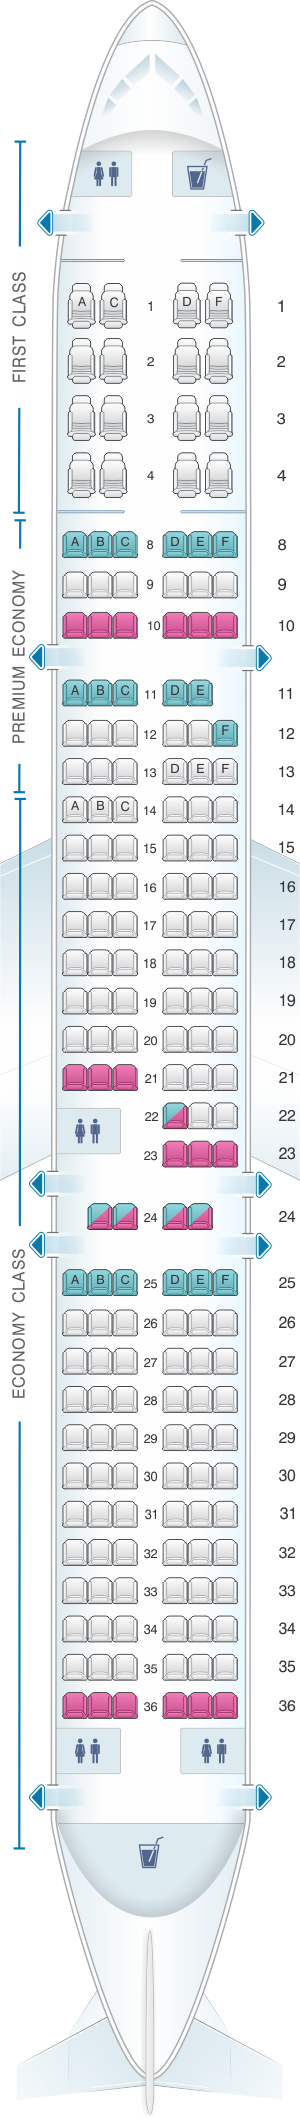 Seat Map American Airlines Airbus A321 181pax | SeatMaestro.com